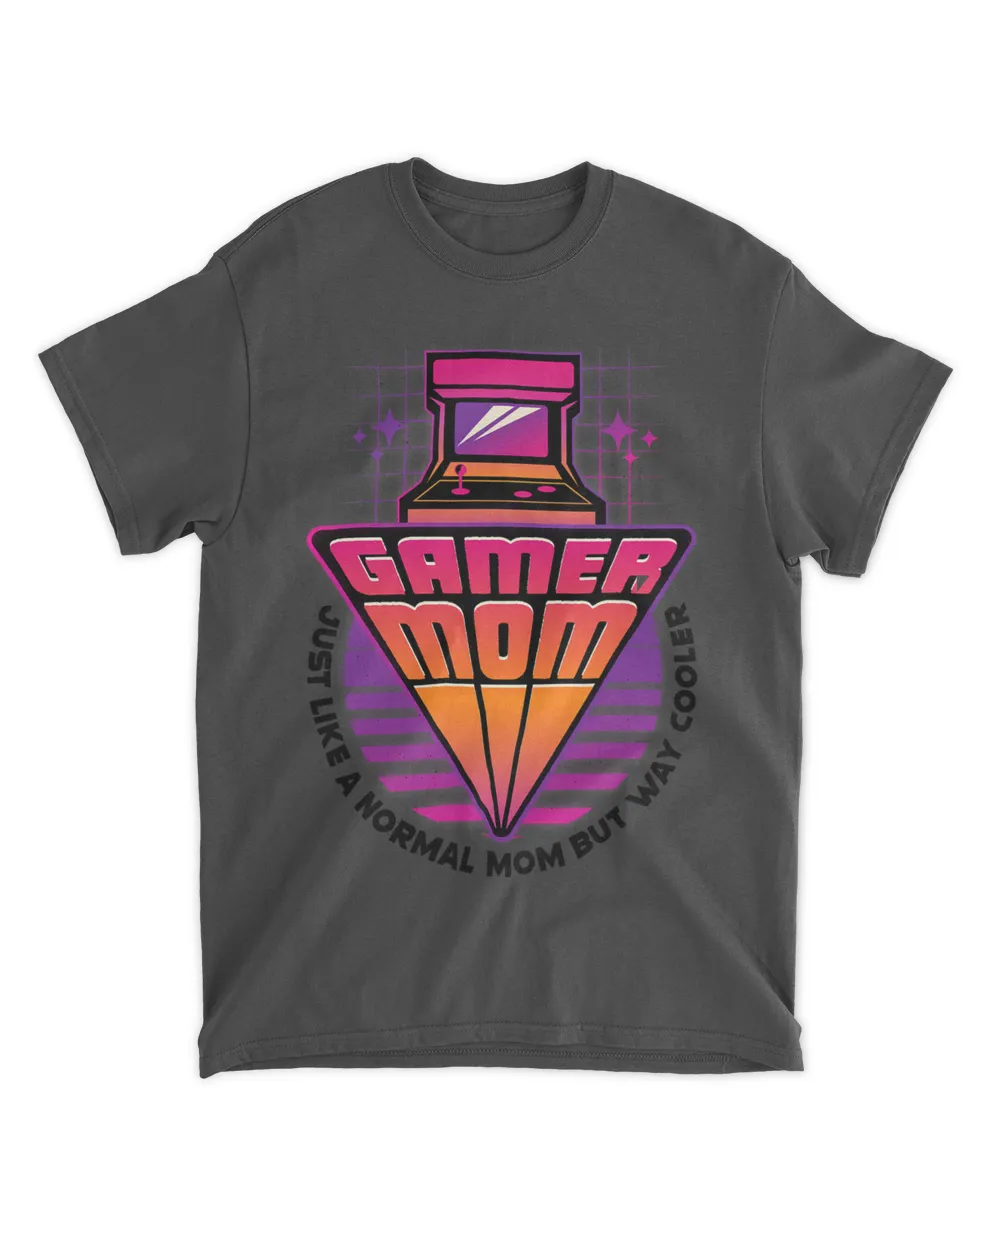 Gamer Mom Mothers Day Arcade Video Game Gaming Mommy Mama